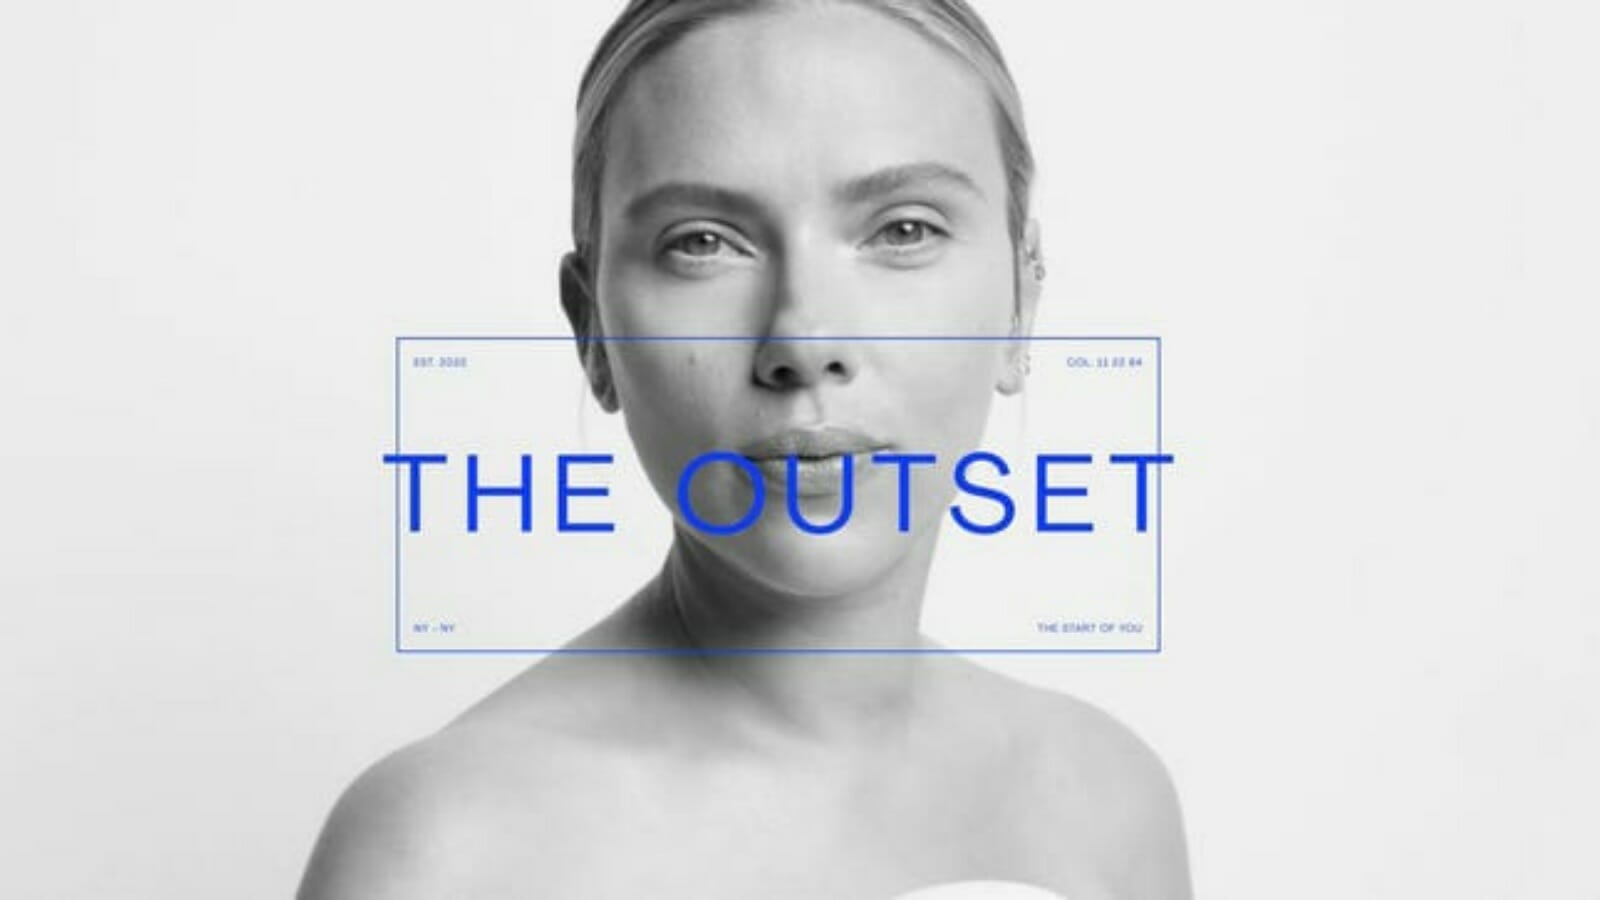 Johansson for her skincare line The Outset